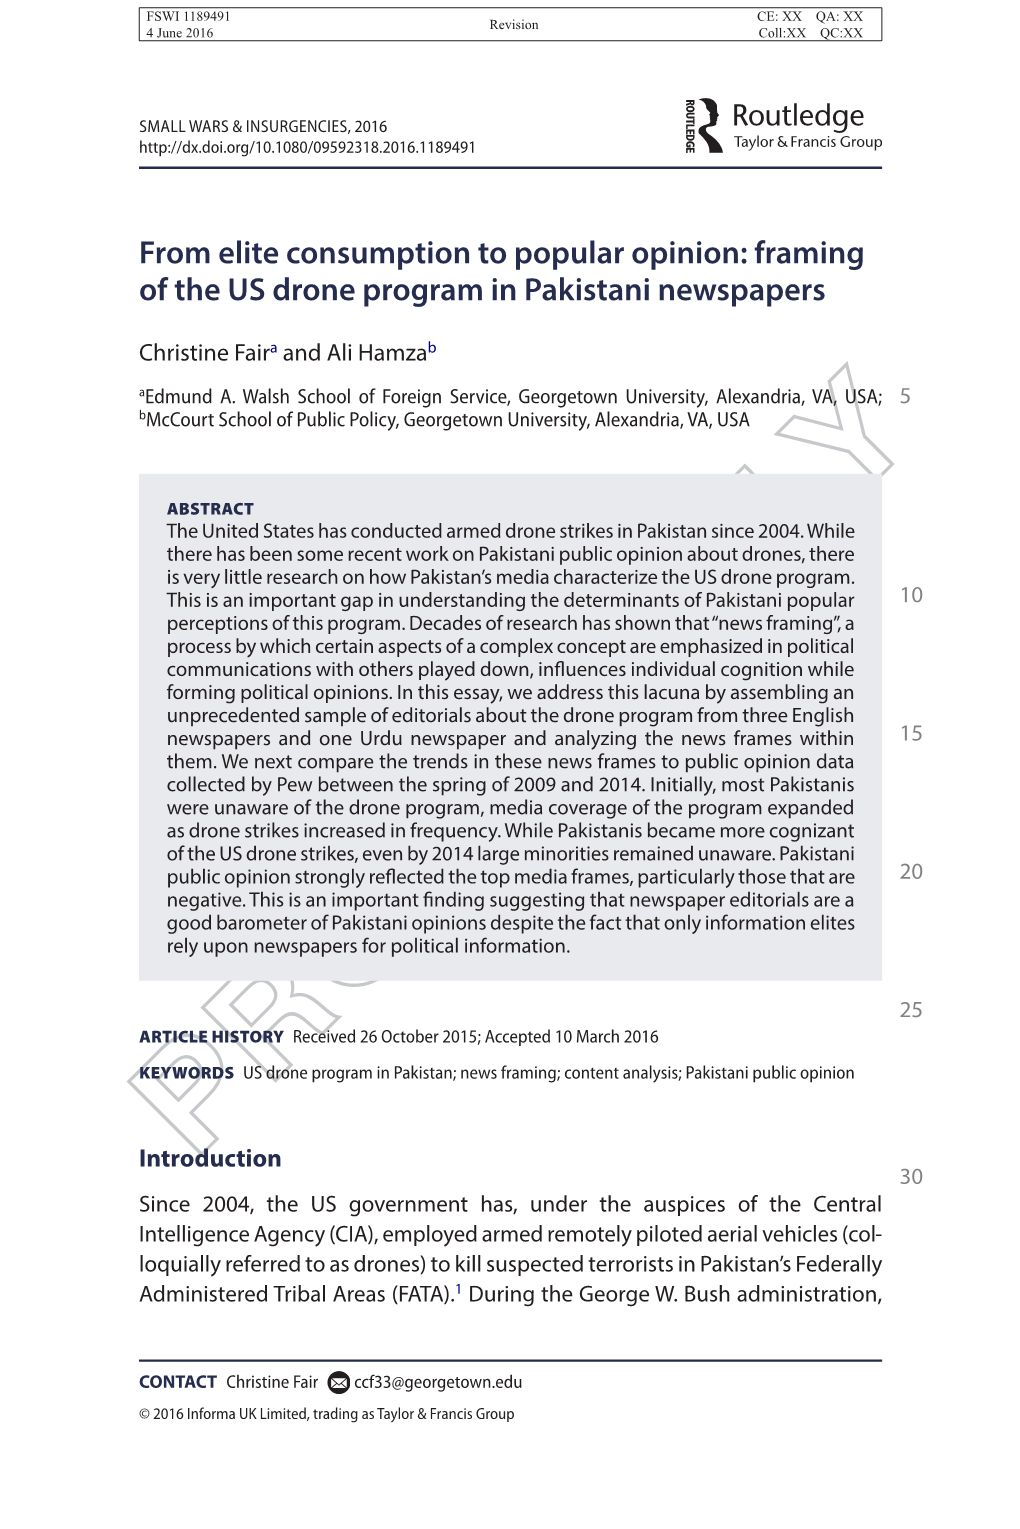 Framing of the US Drone Program in Pakistani Newspapers